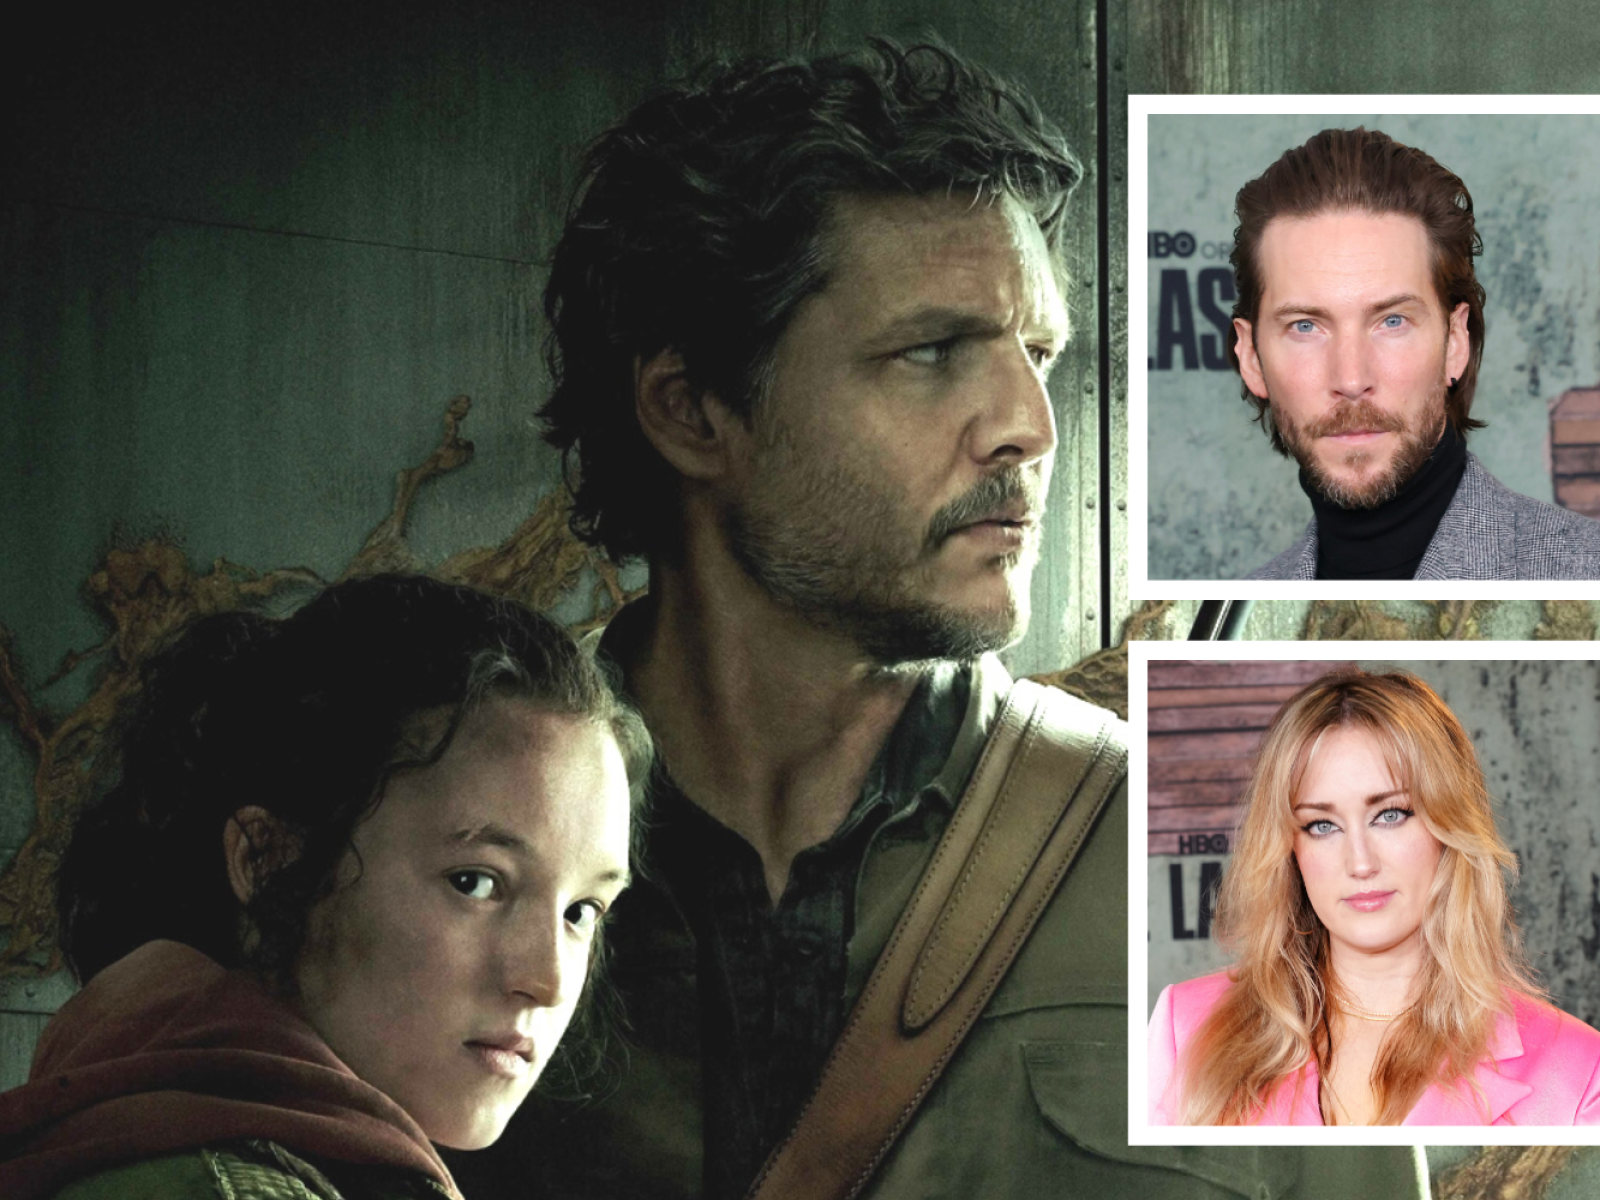 The Last of Us' Boss Teases Troy Baker, Ashley Johnson's Roles in